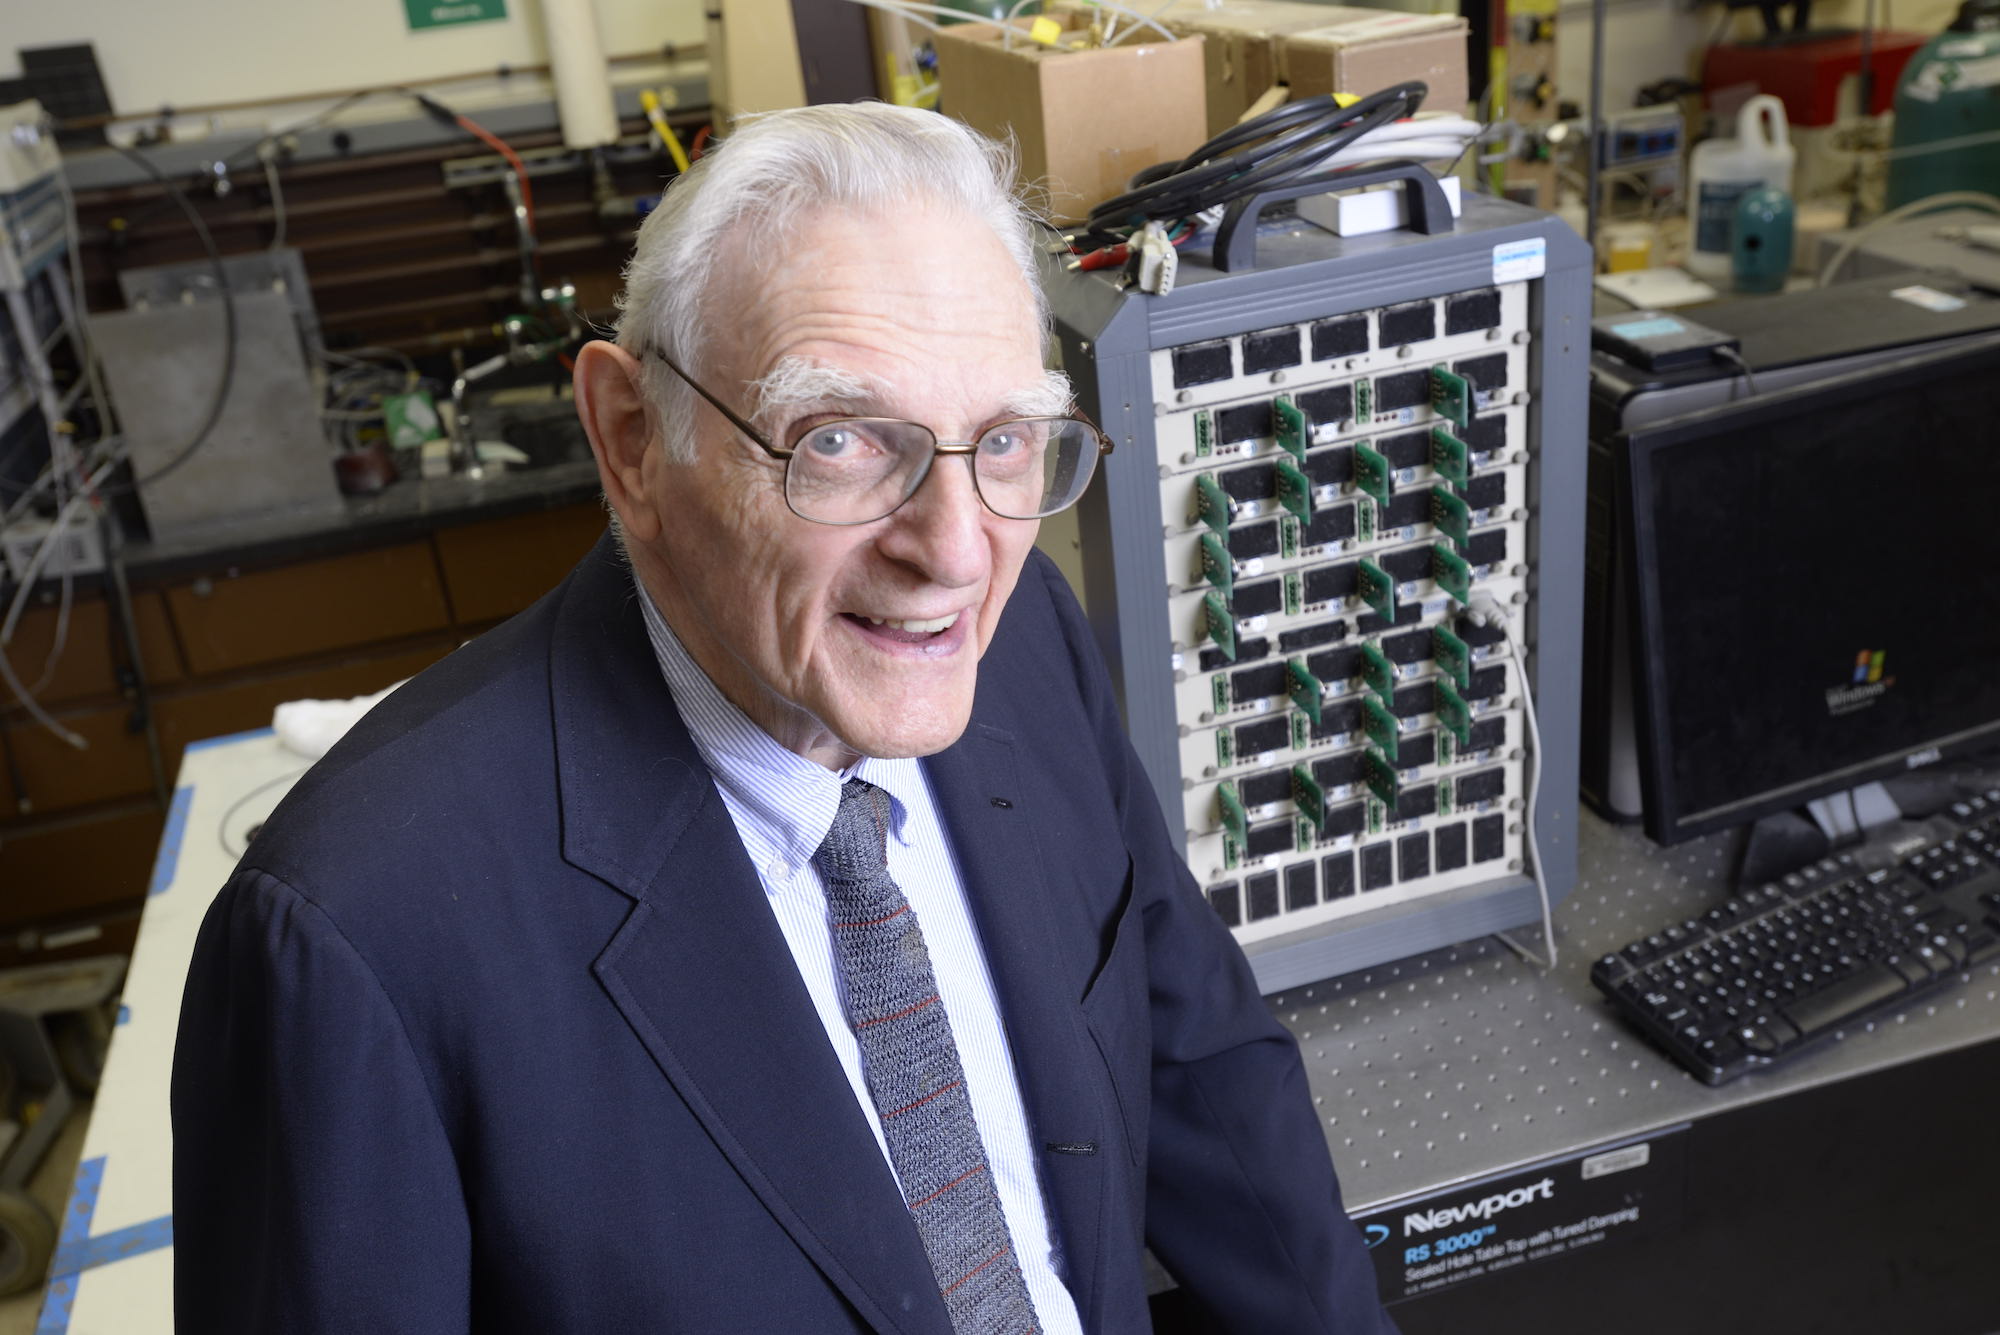 John Goodenough in the lab standing in front of some of his equipment